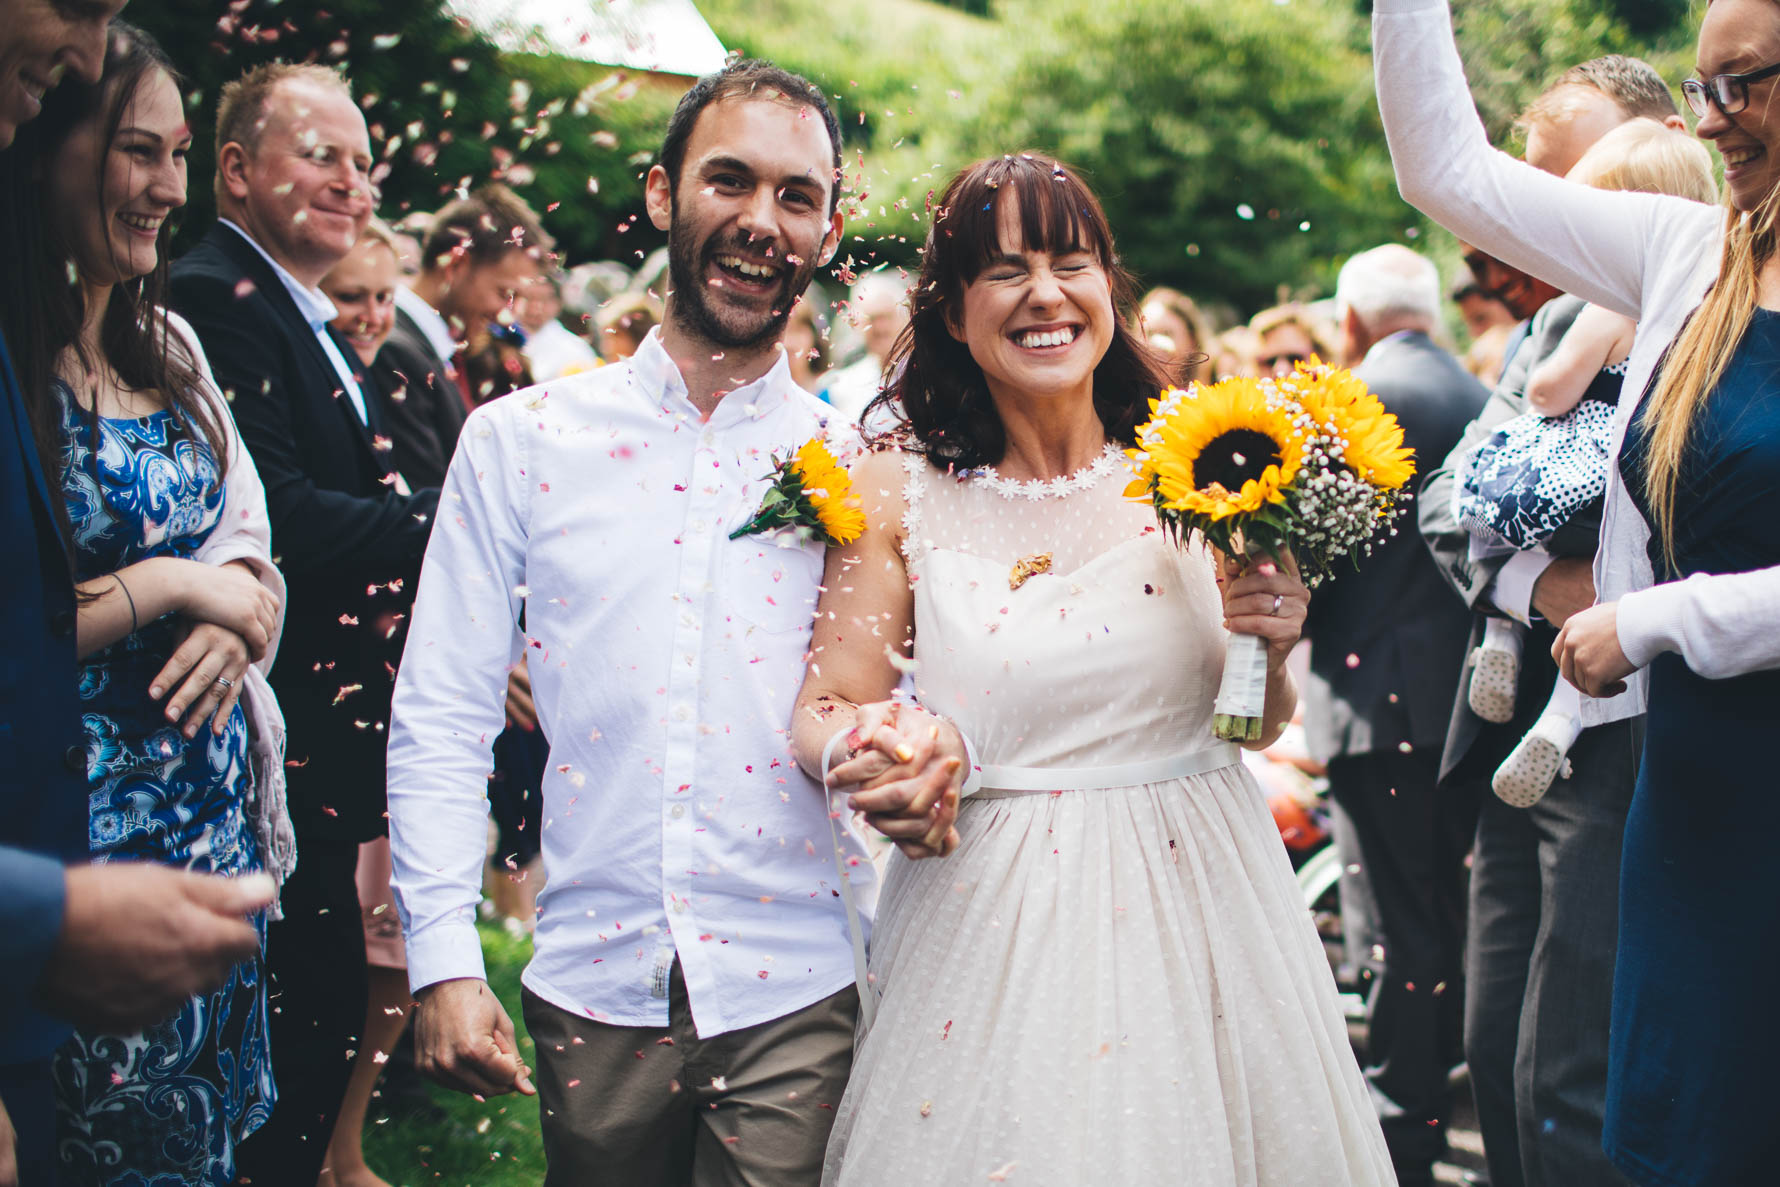 Bride and groom having confetti thrown over them. They are both smiling and the bride has her eyes scrunched up and closed. The bride is holding a bouquet of sunflowers and the groom has a sunflower pinned to his white shirt